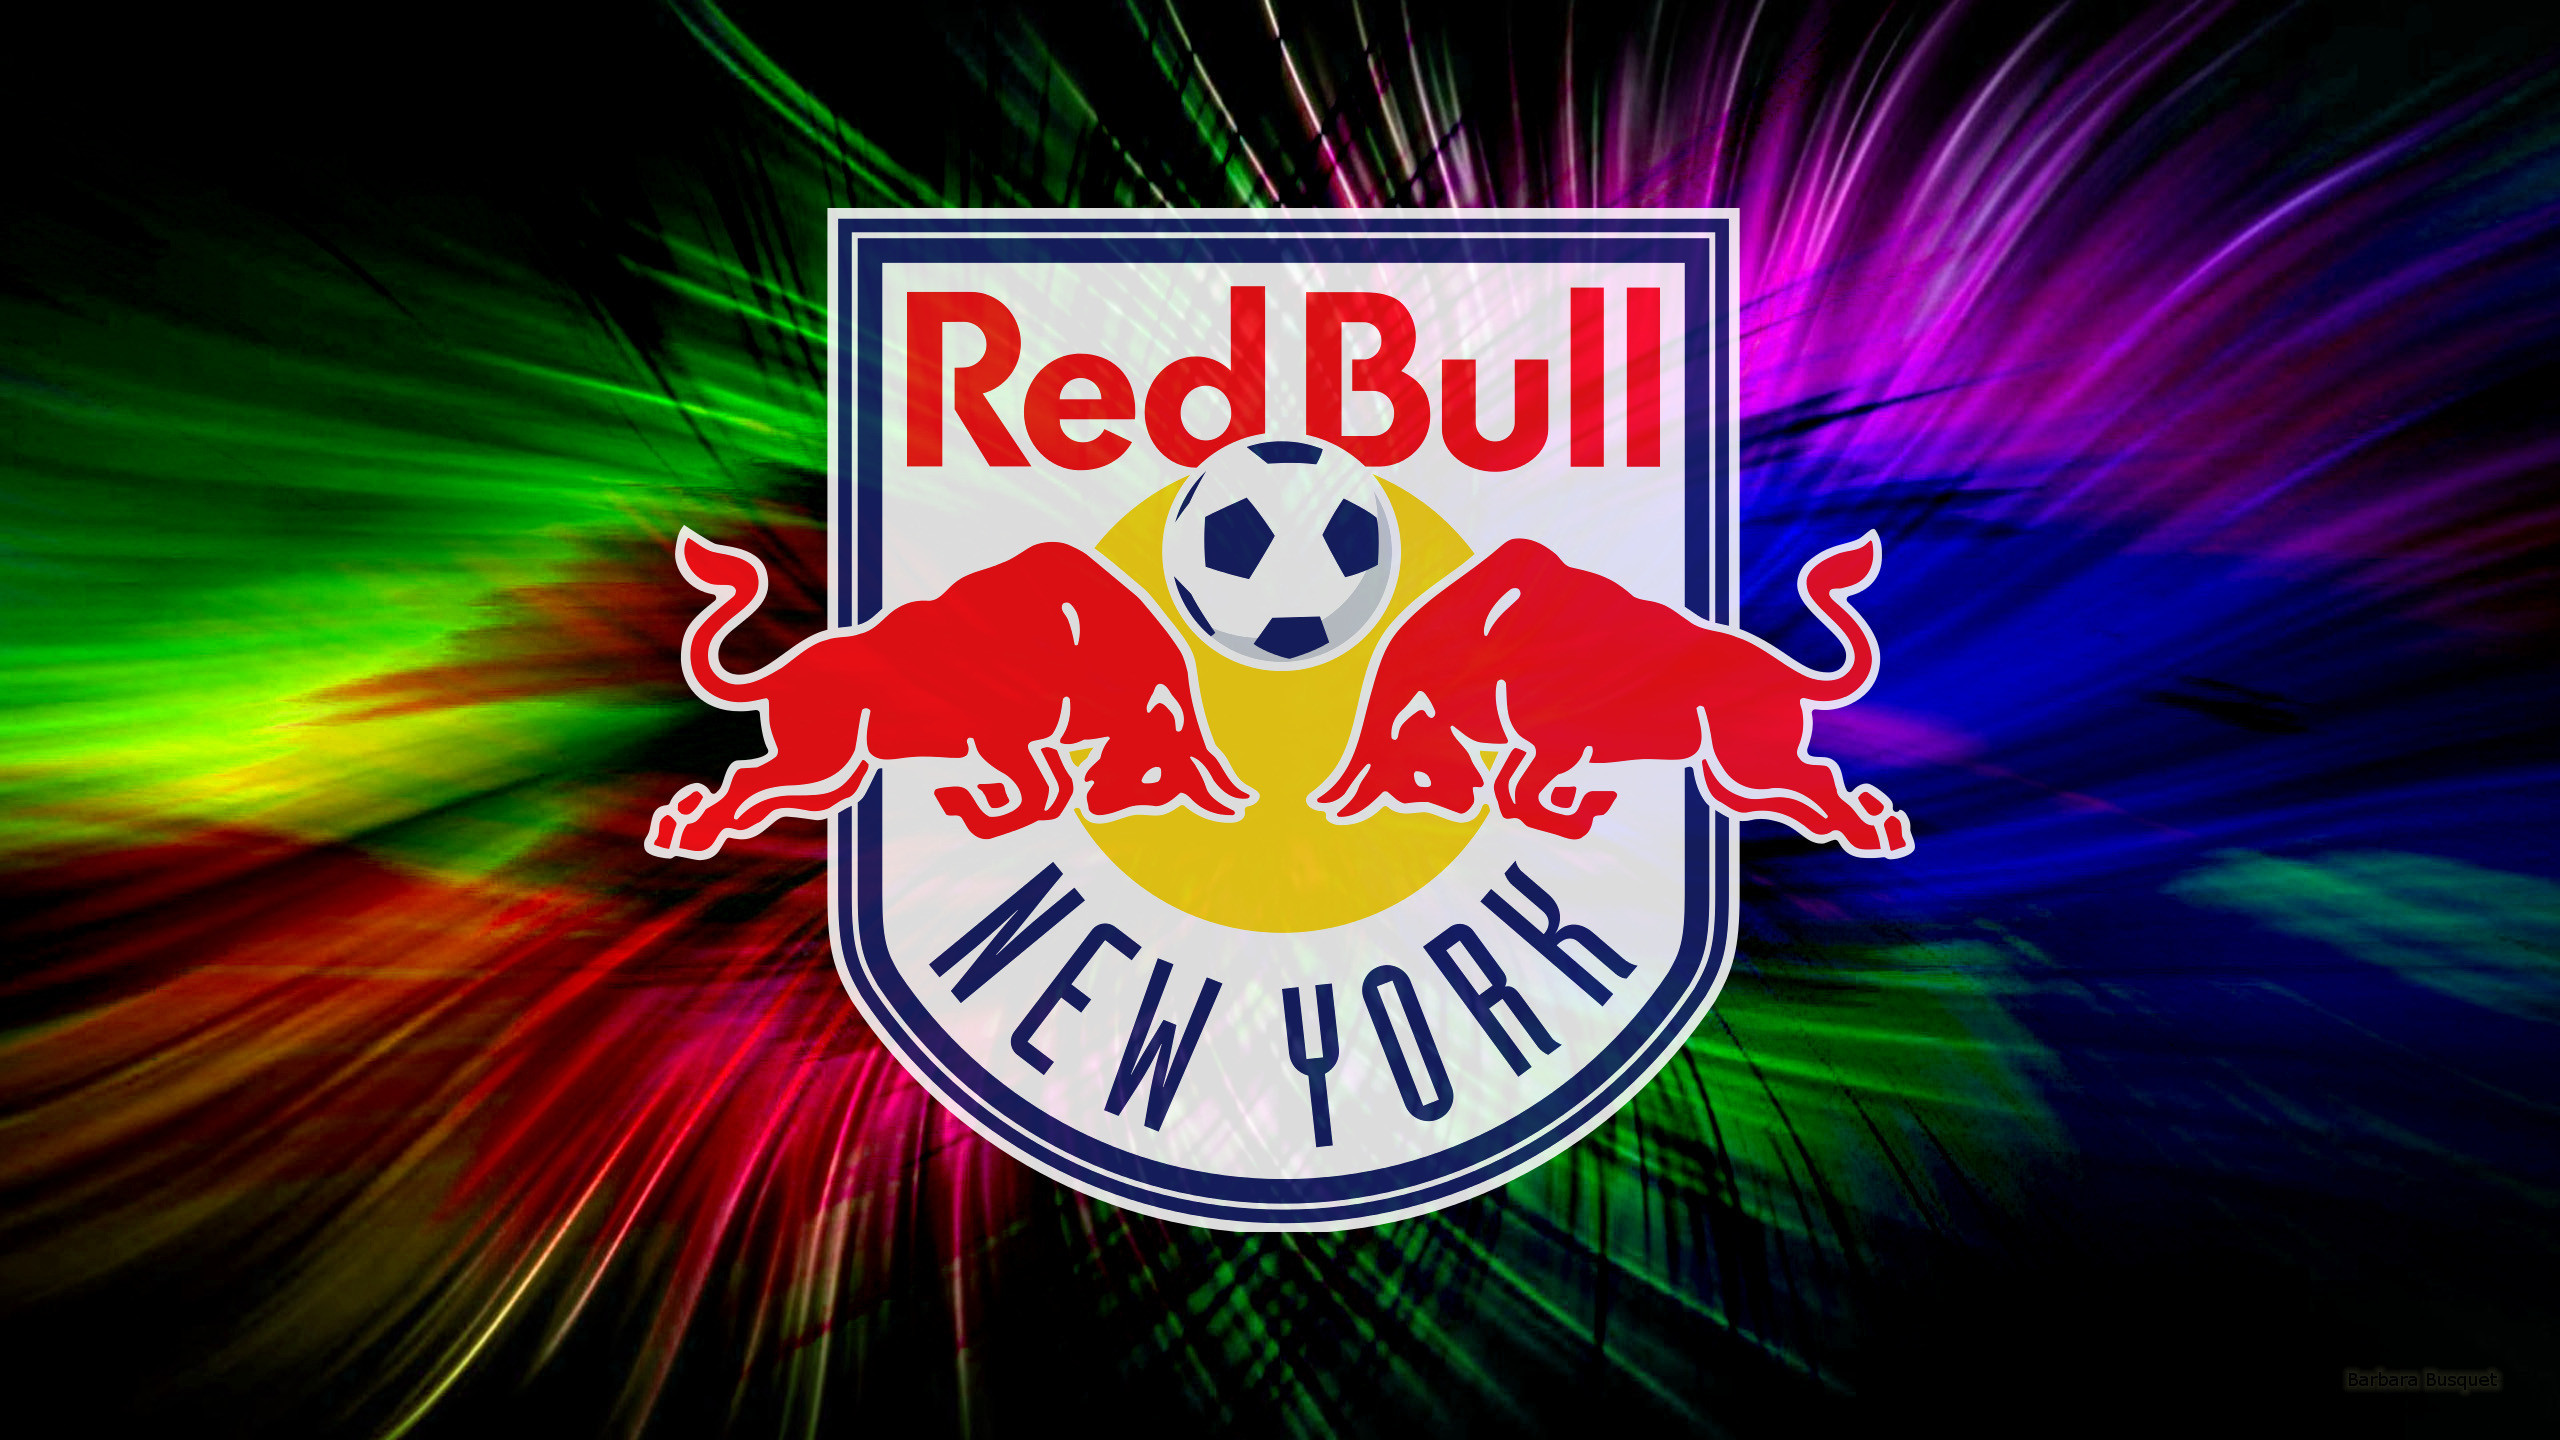 2560x1440 Colorful New York Red Bulls wallpaper. With centered logo.